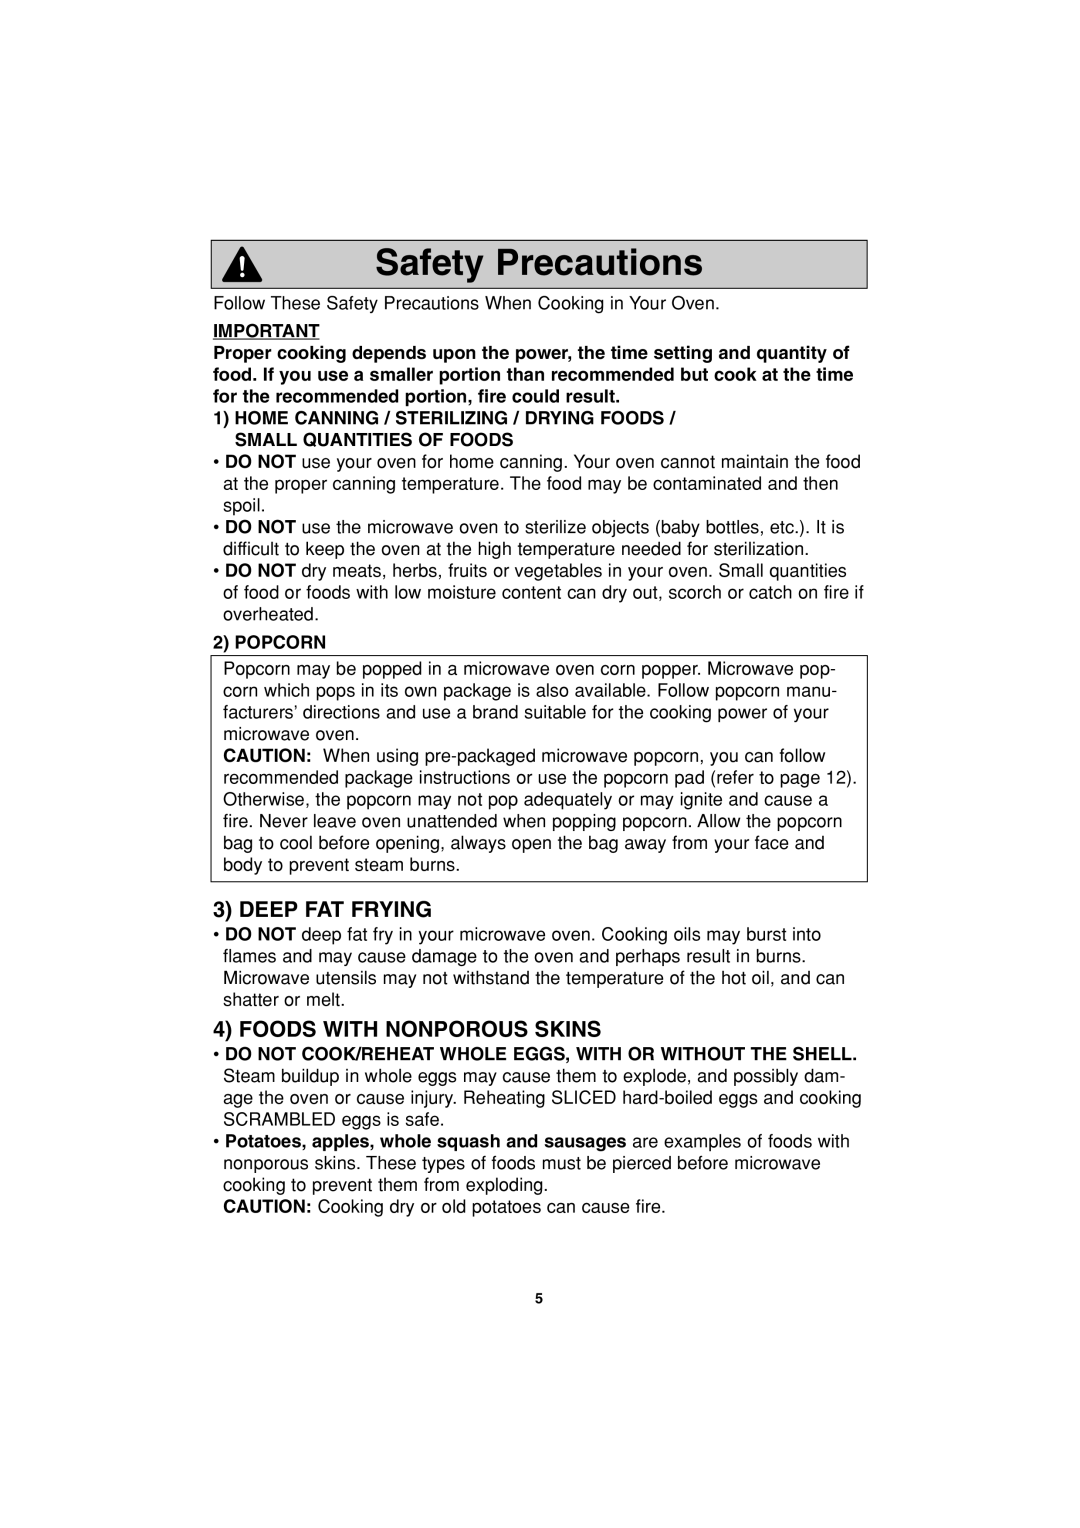 Panasonic NN-S423 important safety instructions Safety Precautions, Deep Fat Frying, Foods With Nonporous Skins 